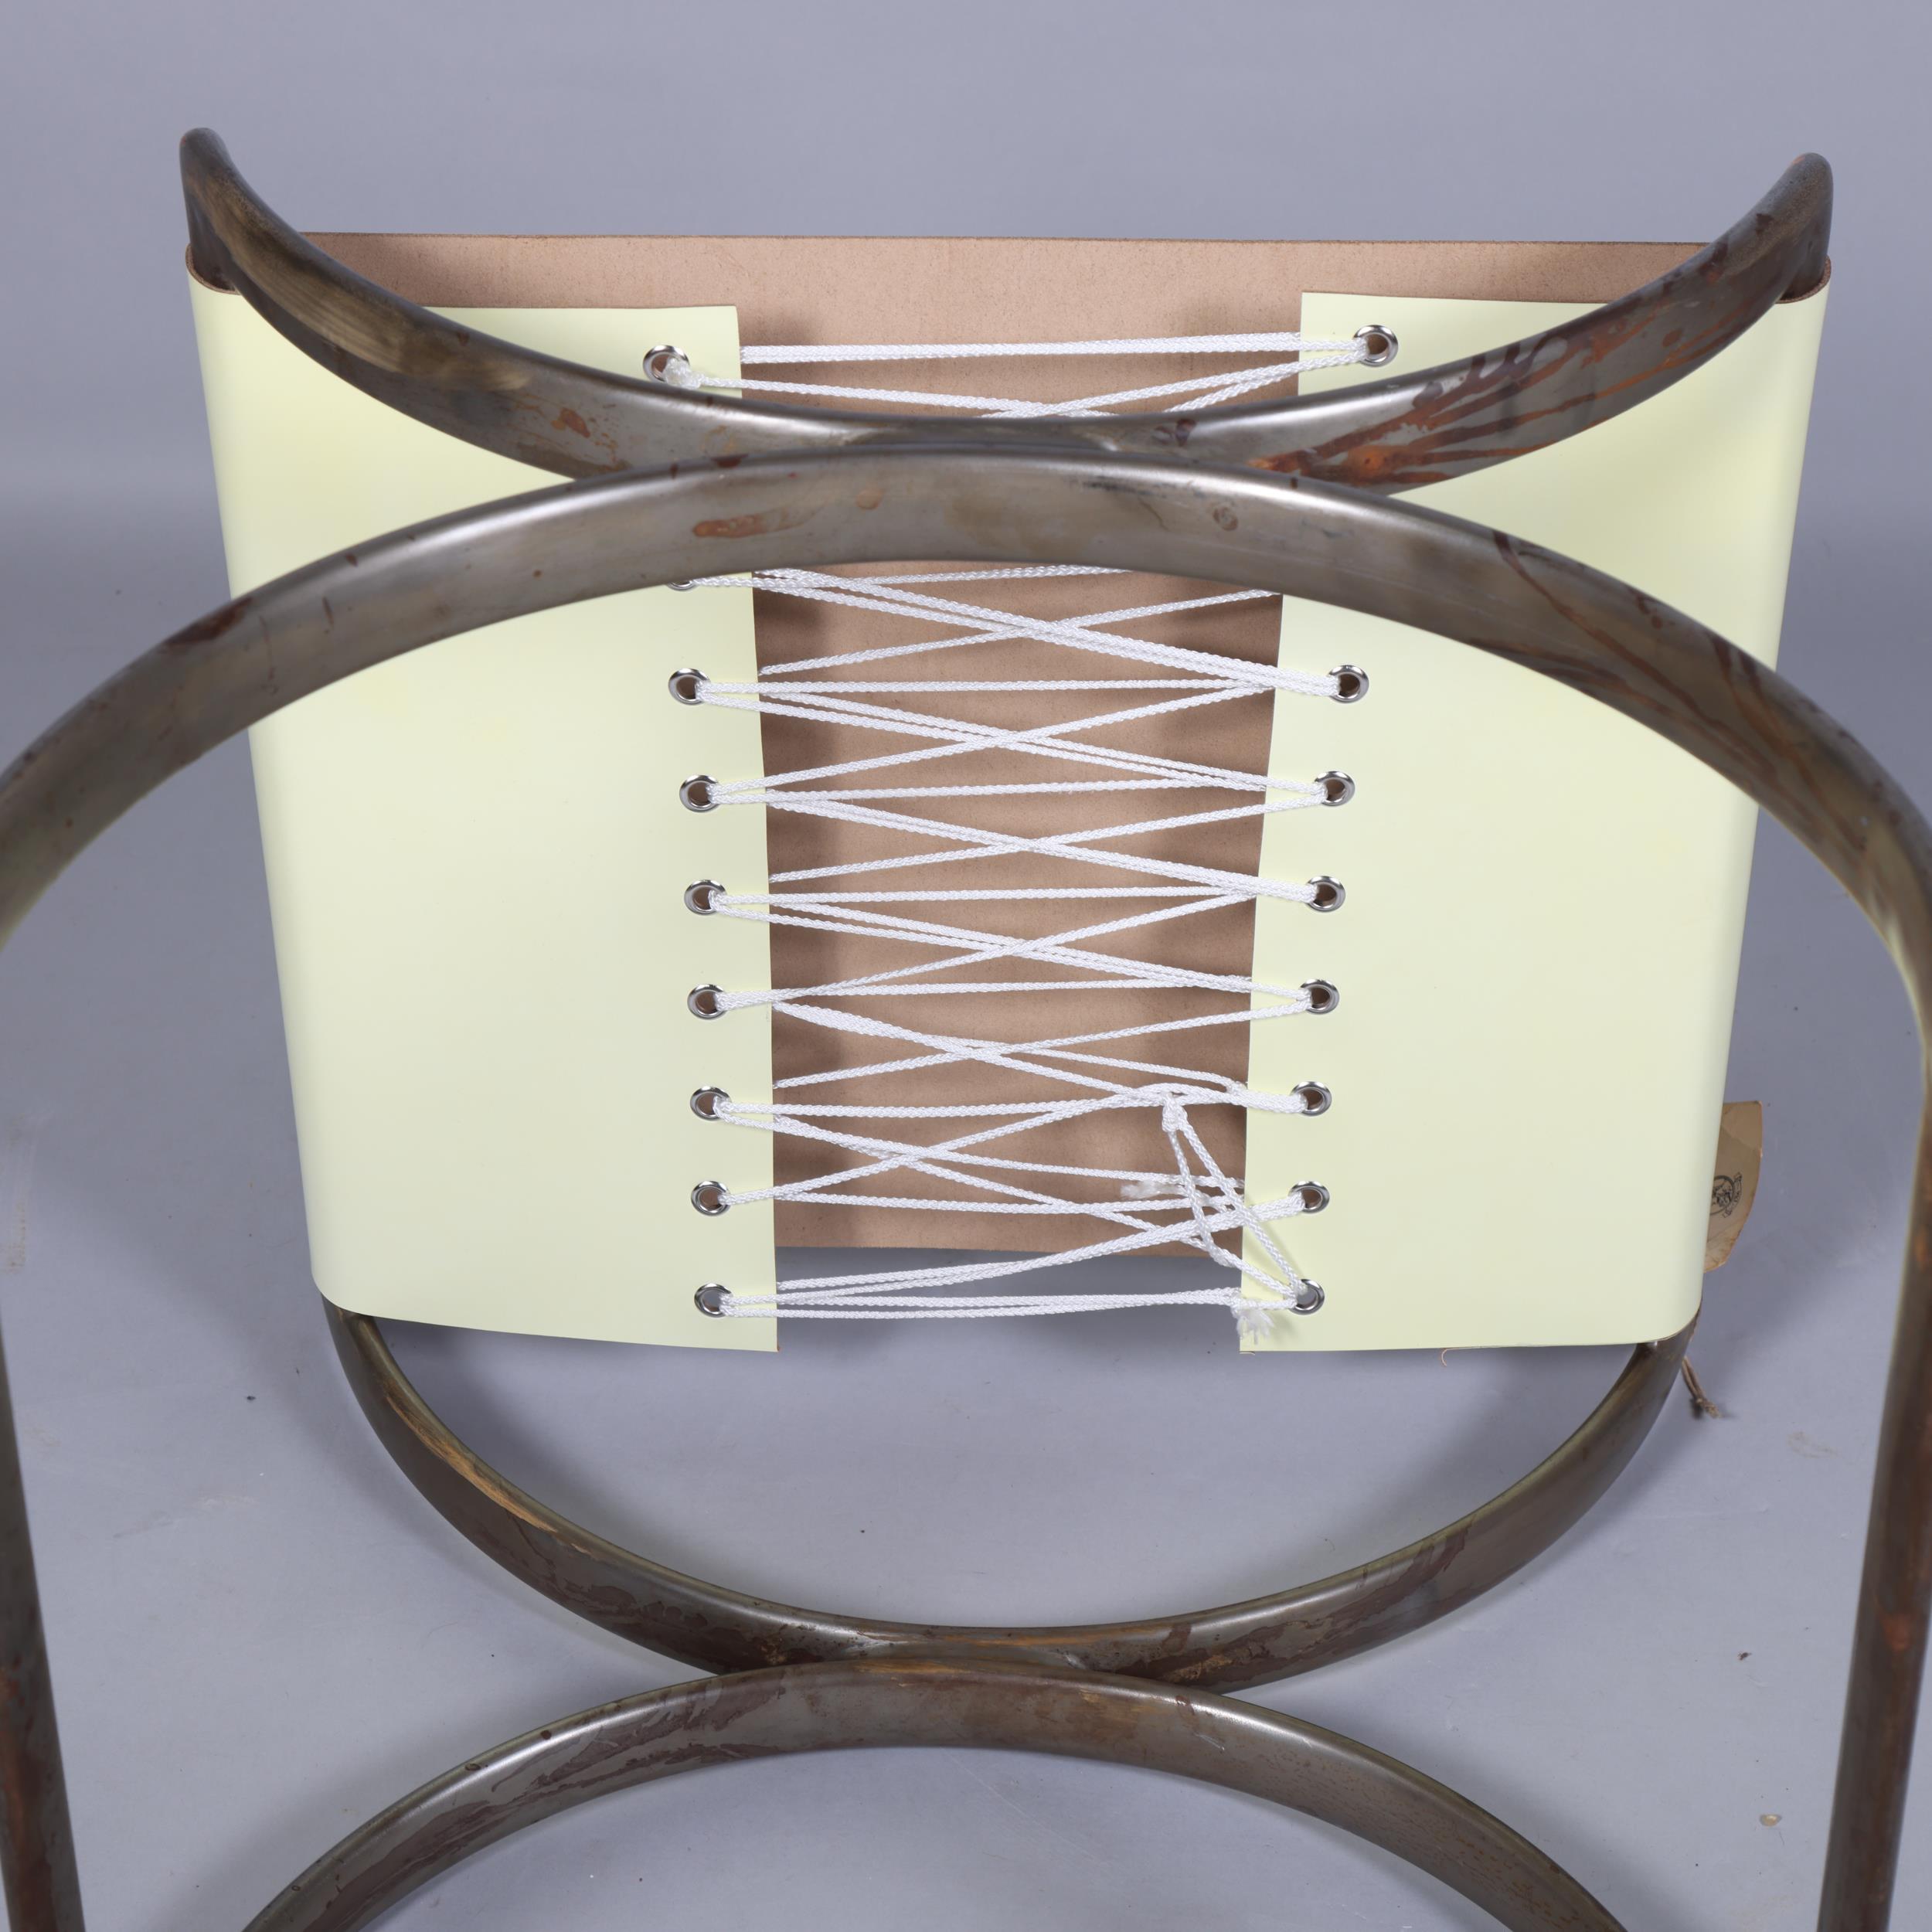 AMBROSE HEAL, a rare 1930s Art Deco or modernist curule chair in oval section tubular steel with - Image 3 of 3